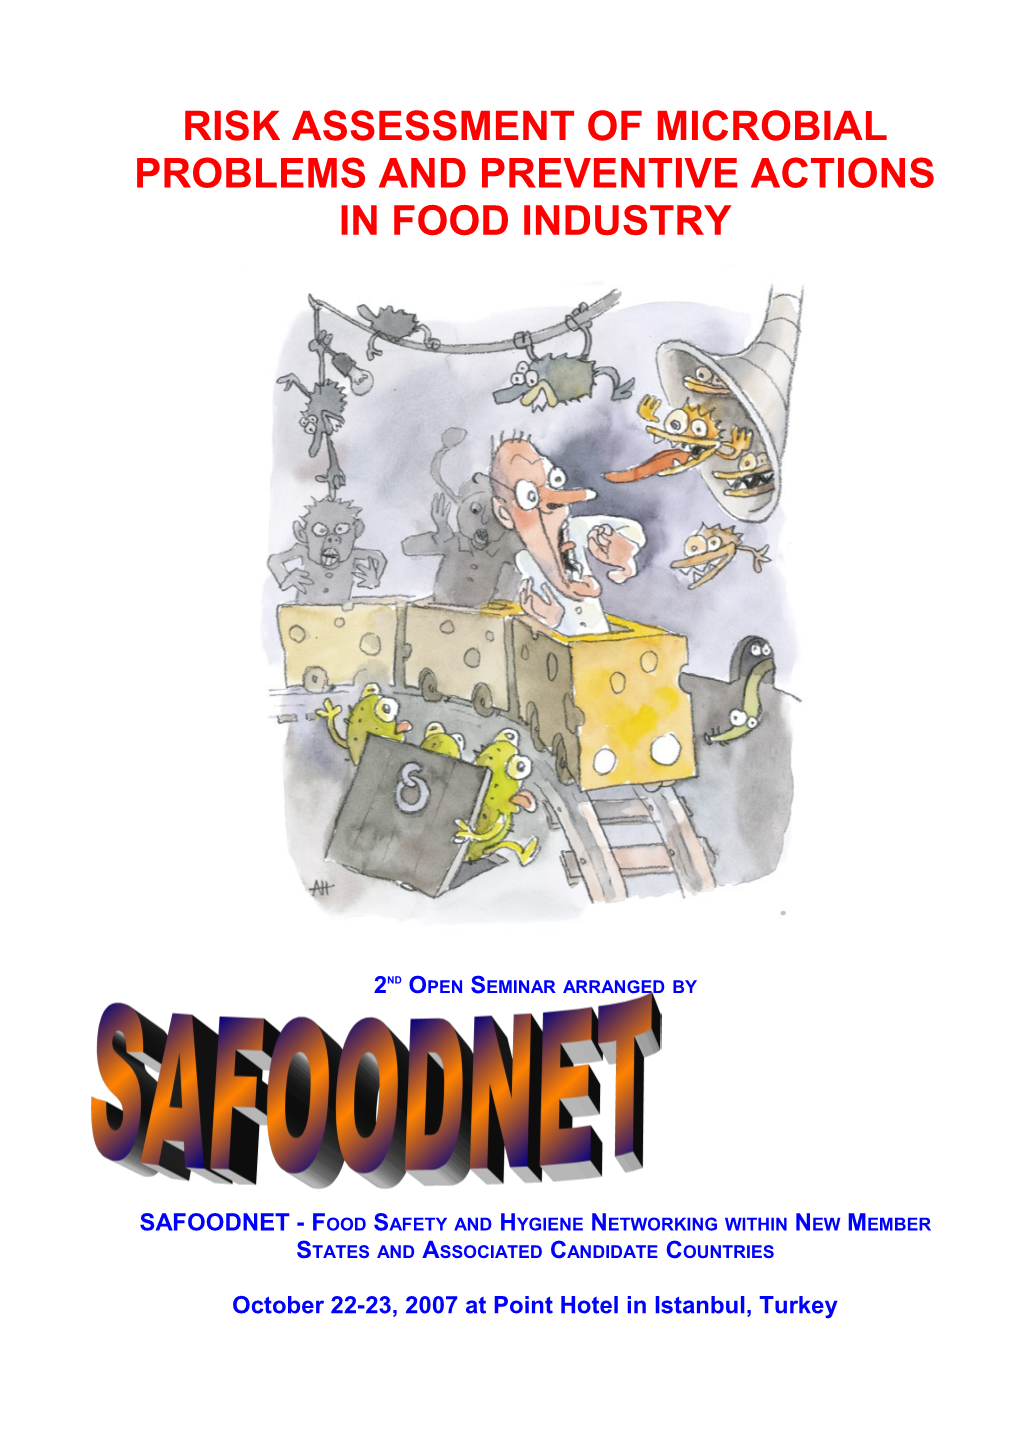 Risk Assessment of Microbial Problems and Preventive Actions in Food Industry